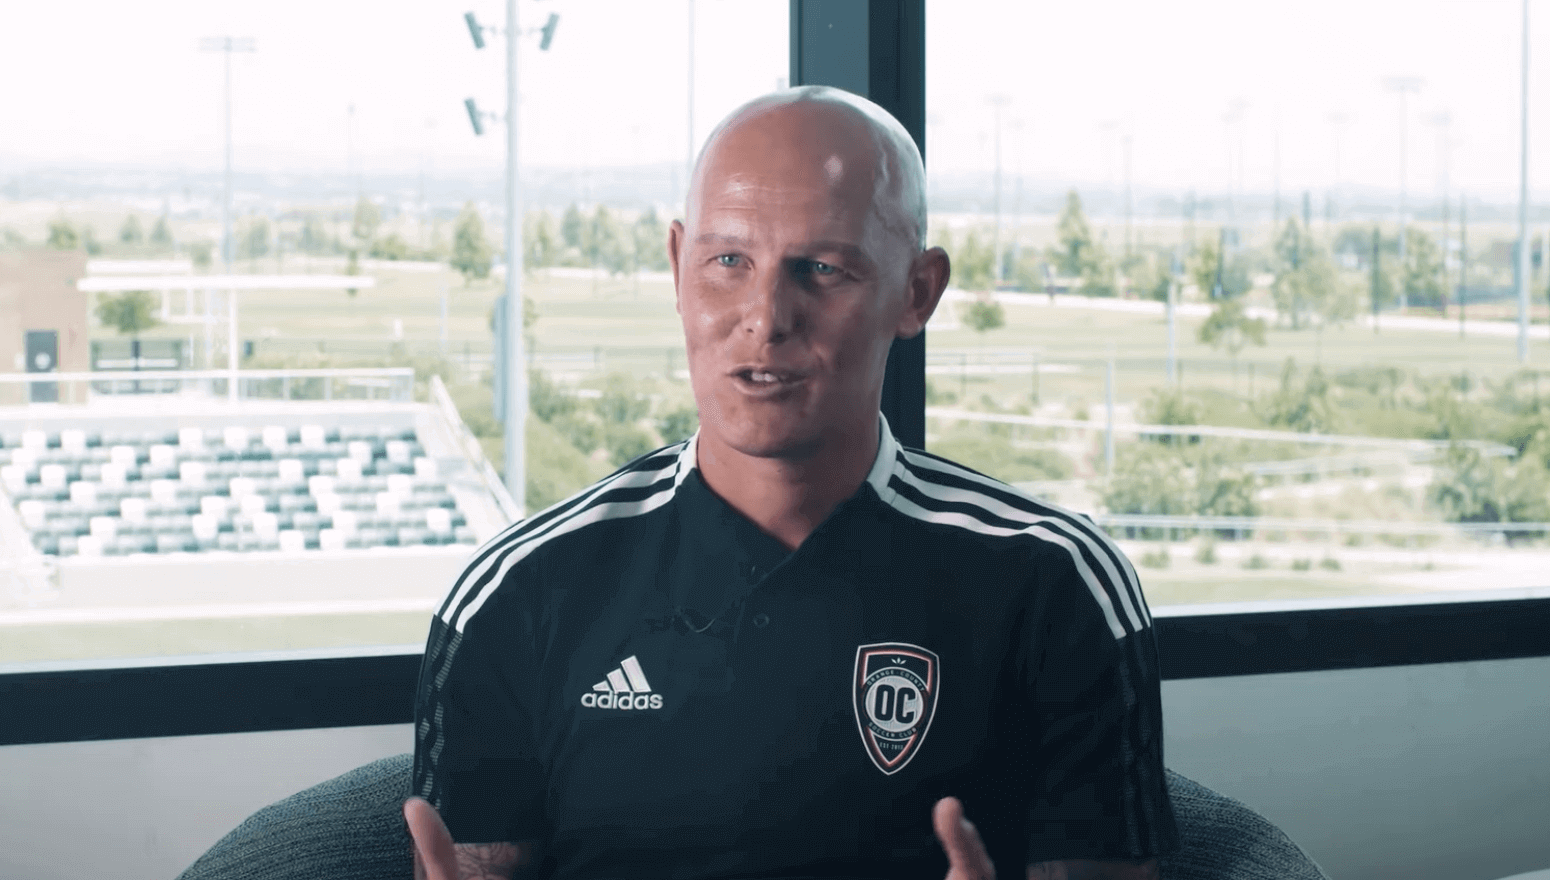 A photo of Richard Chaplow, the head coach of the Orange County Soccer Club.